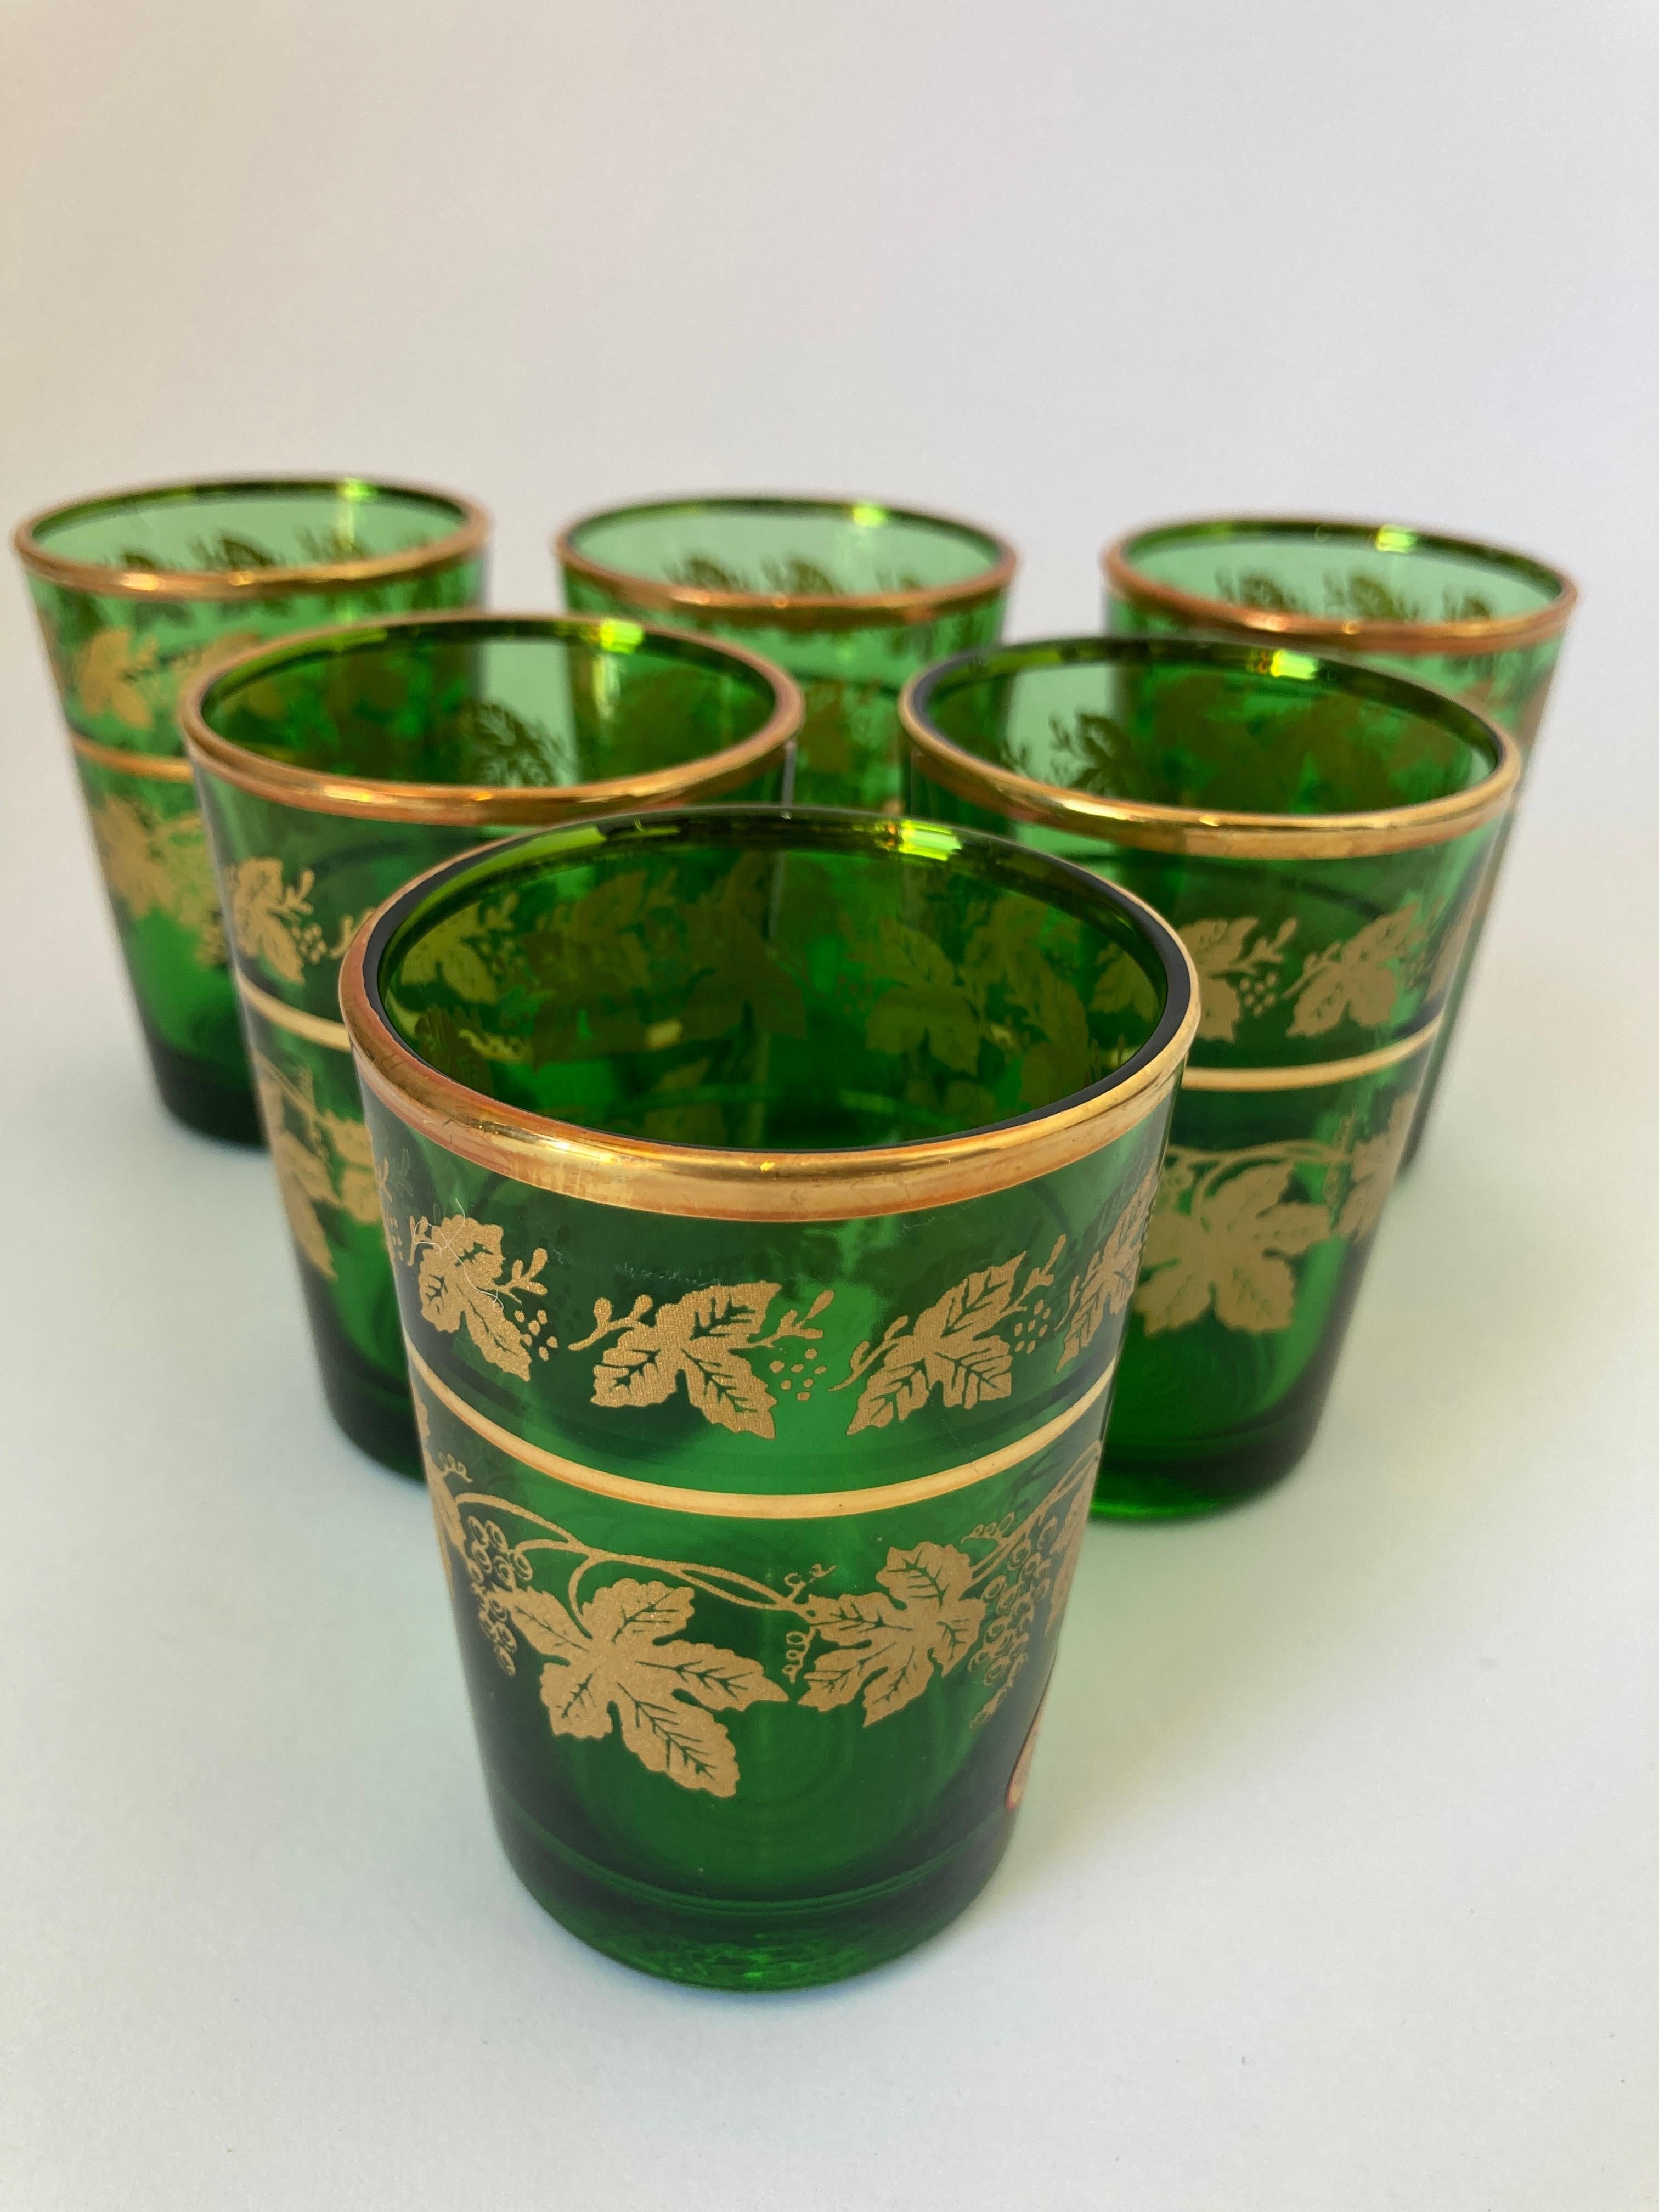 Set of six green and gold handblown Moorish shot glasses.
Use them for Moroccan tea, or any hot or cold drink.
Shot glasses very light finely decorated with a classical gold Moorish pattern frieze. 
Use these elegant glasses for Moroccan tea, or